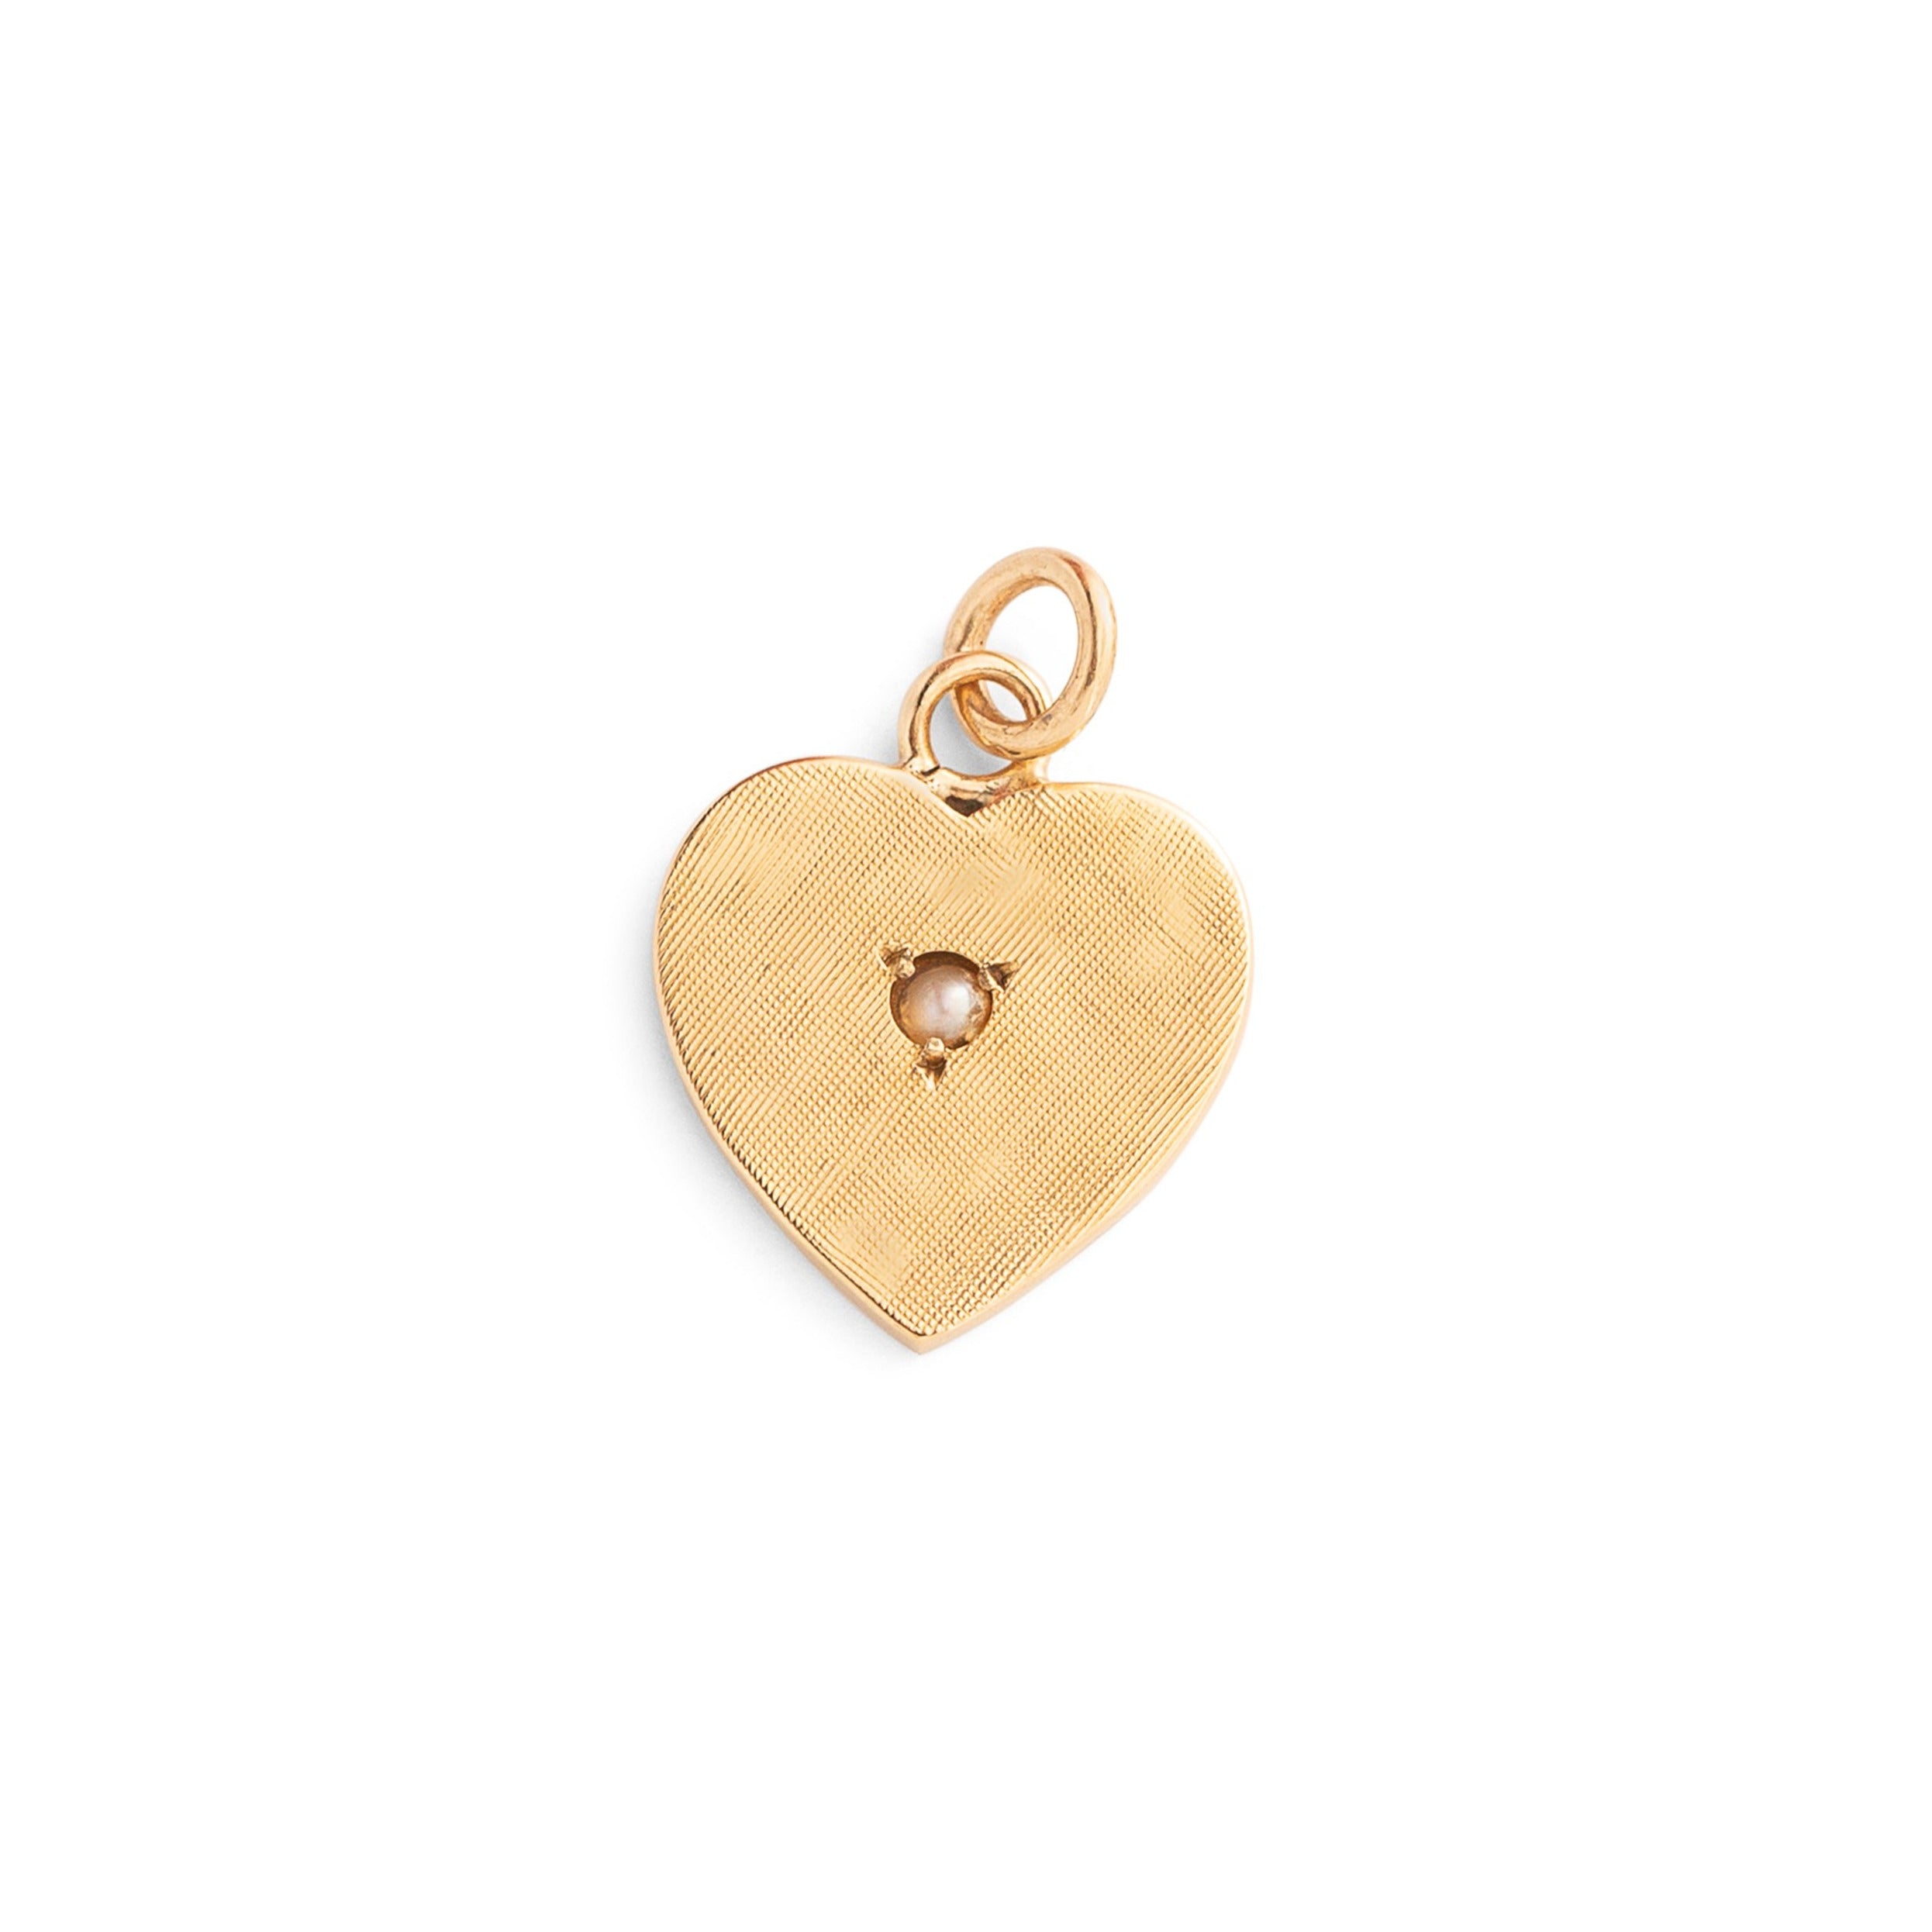 Pearl and Textured 14k Gold Heart Charm